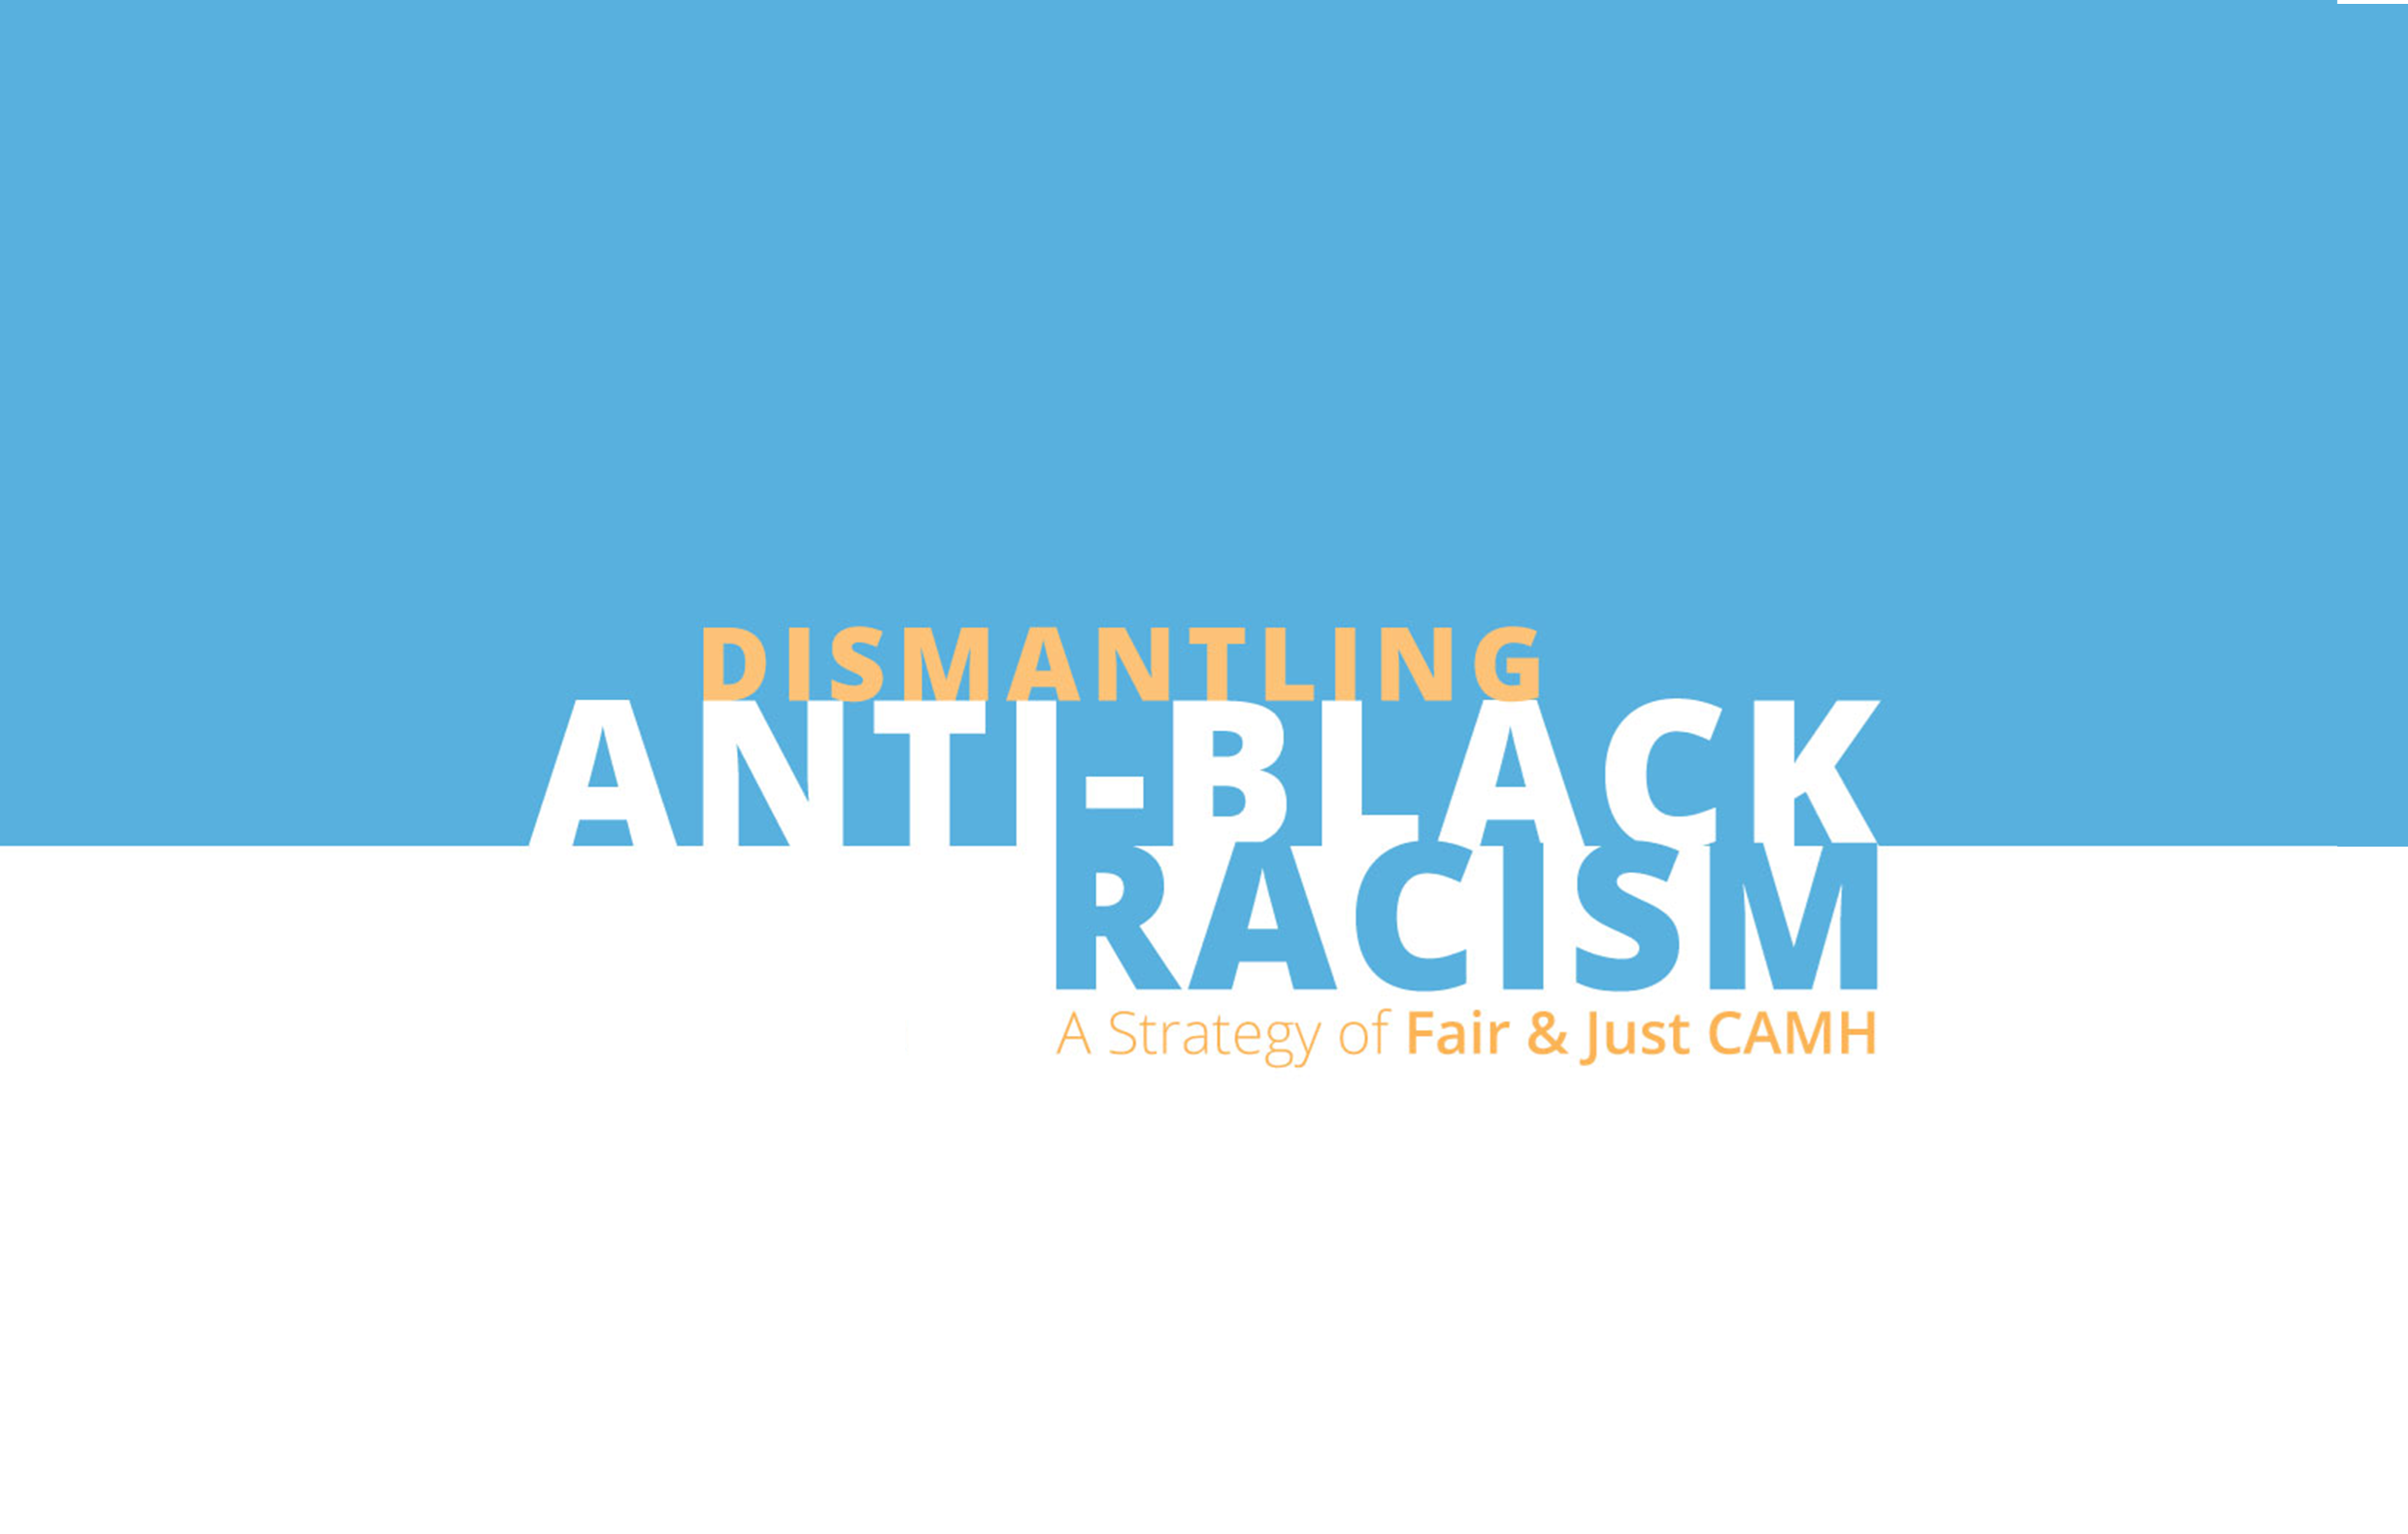 Dismantling anti-Black racism, a policy of Fair and Just CAMH